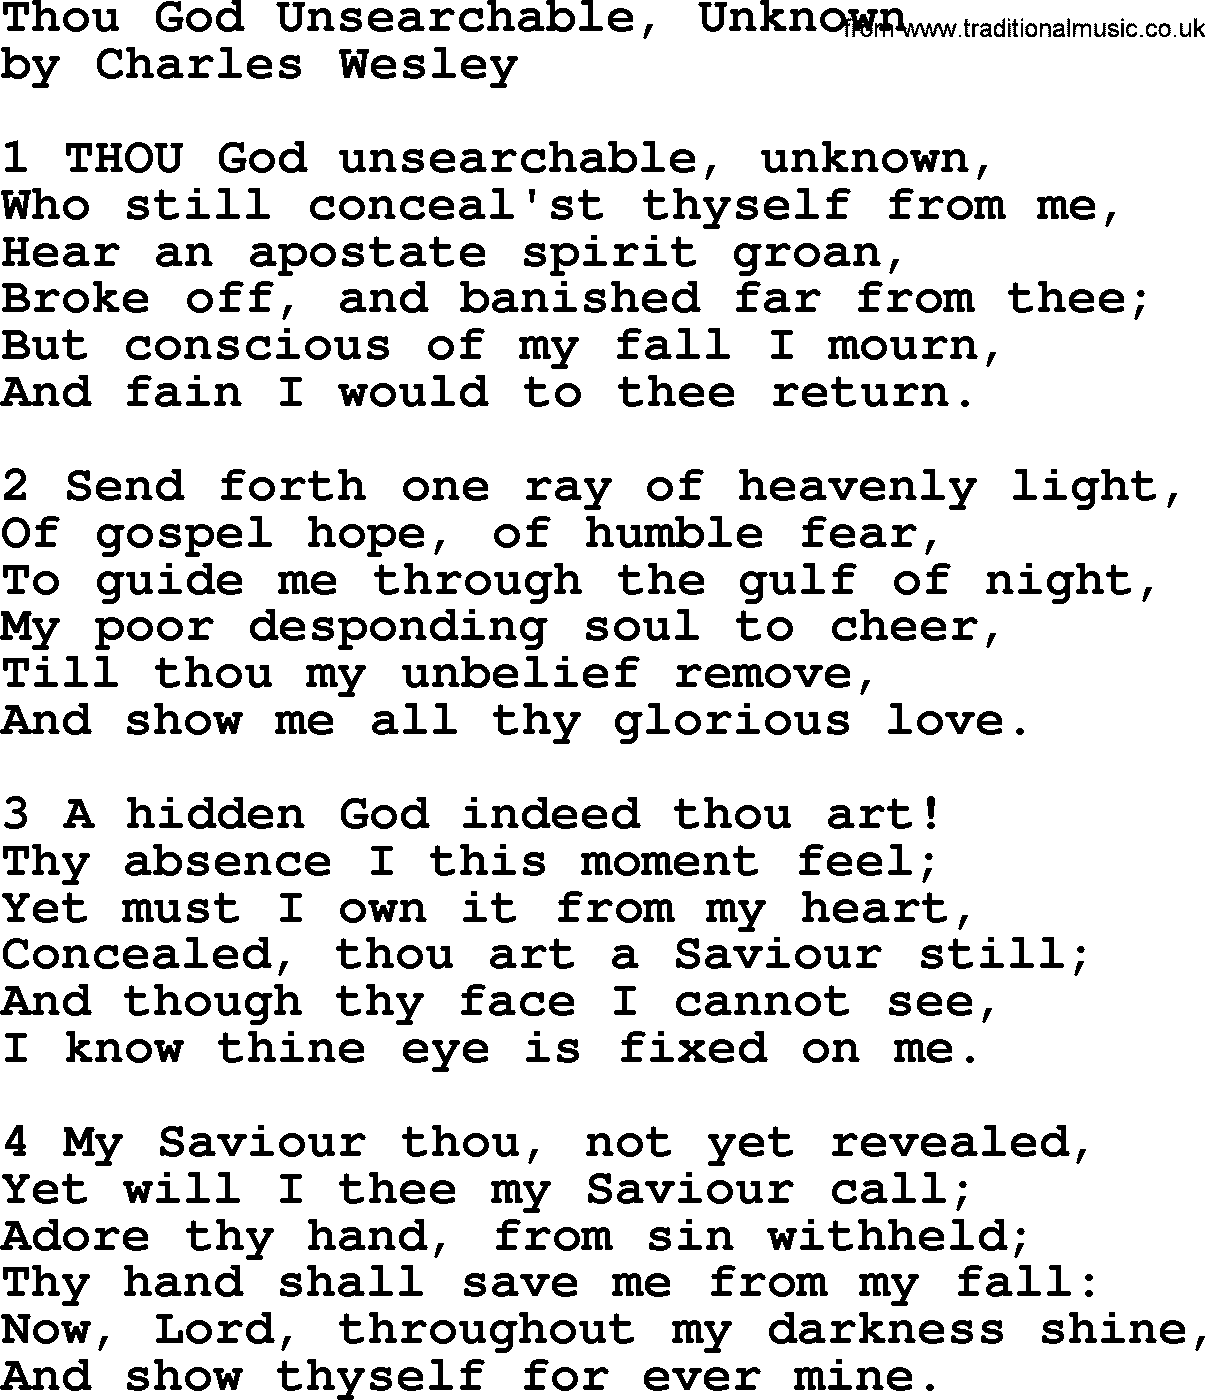 Charles Wesley hymn: Thou God Unsearchable, Unknown, lyrics